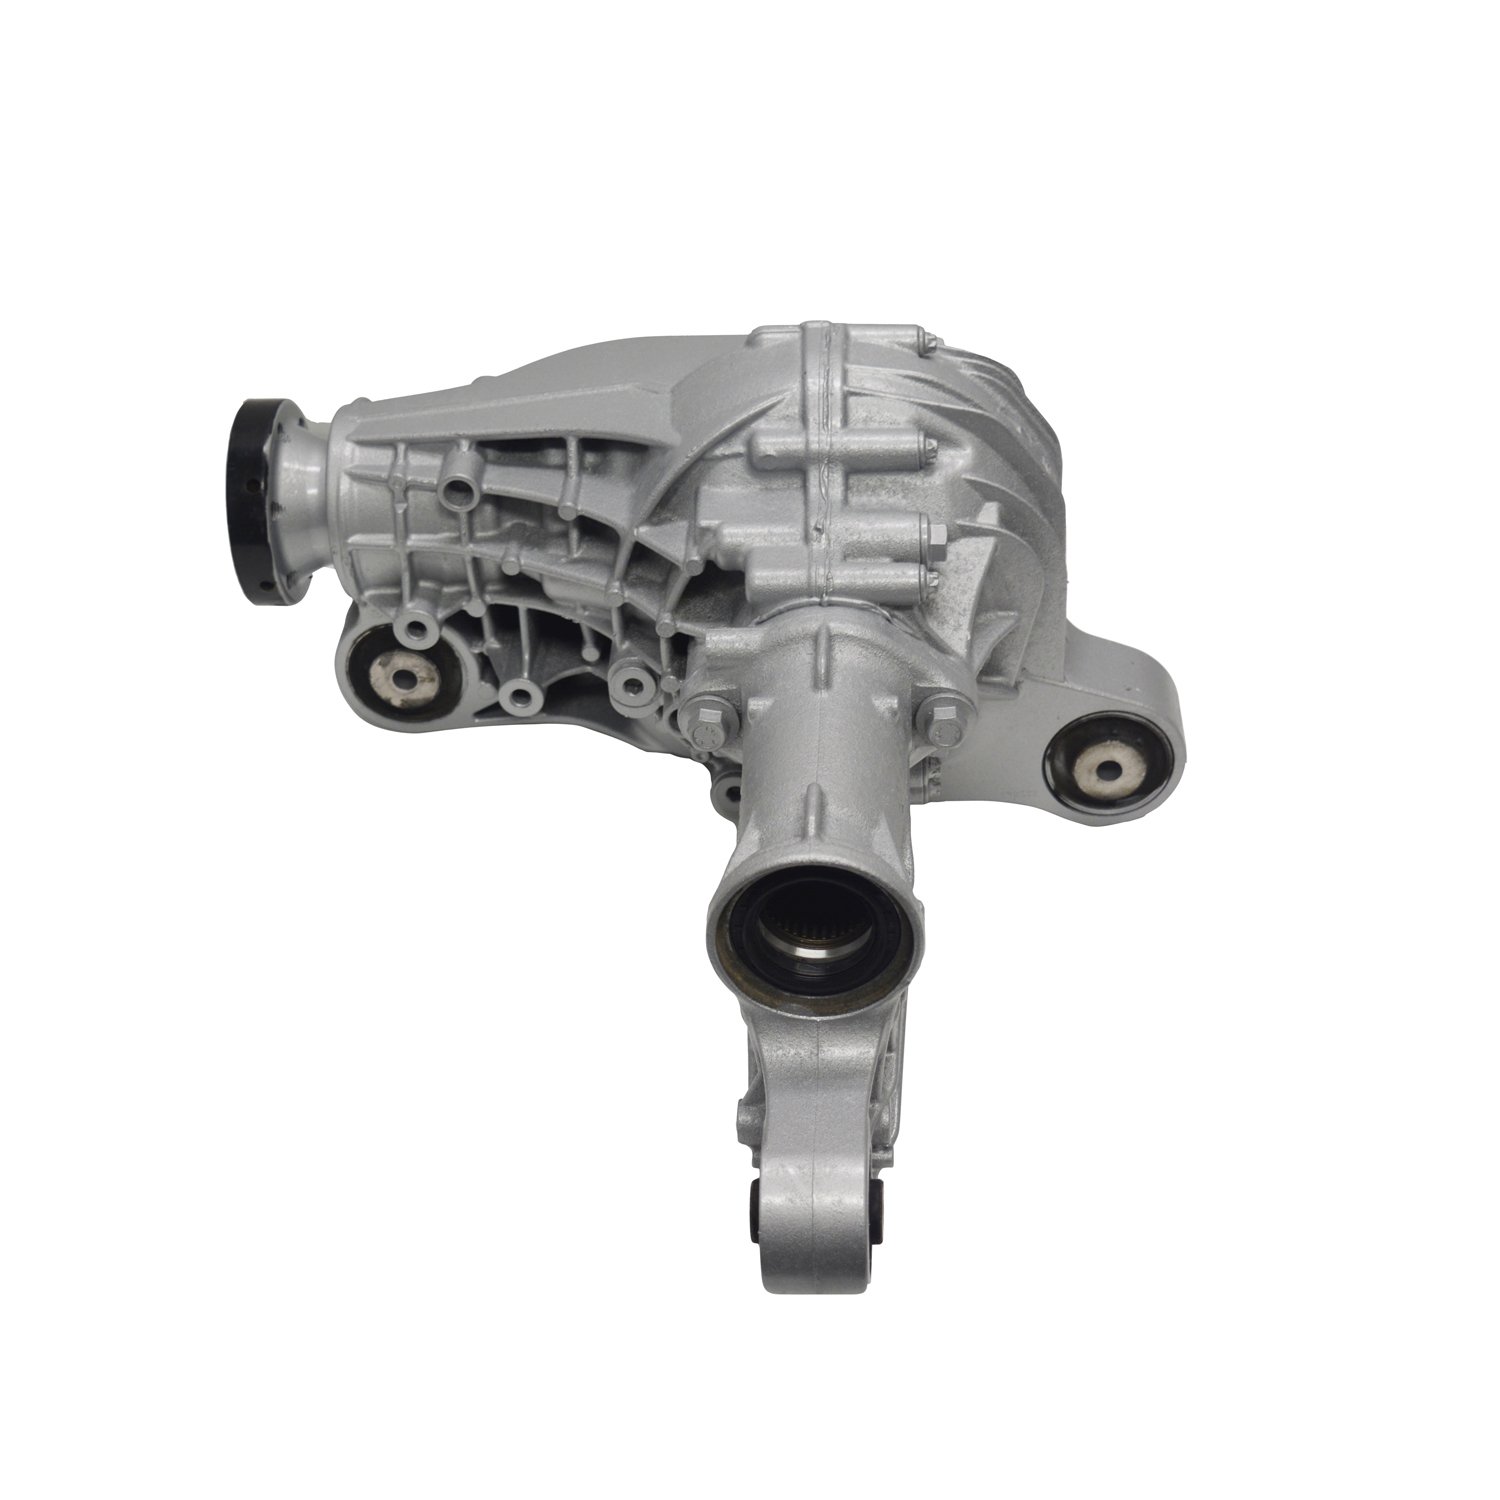 Remanufactured Front diff for 2007-2011 Mercedes ML Class with 3.45 Ratio